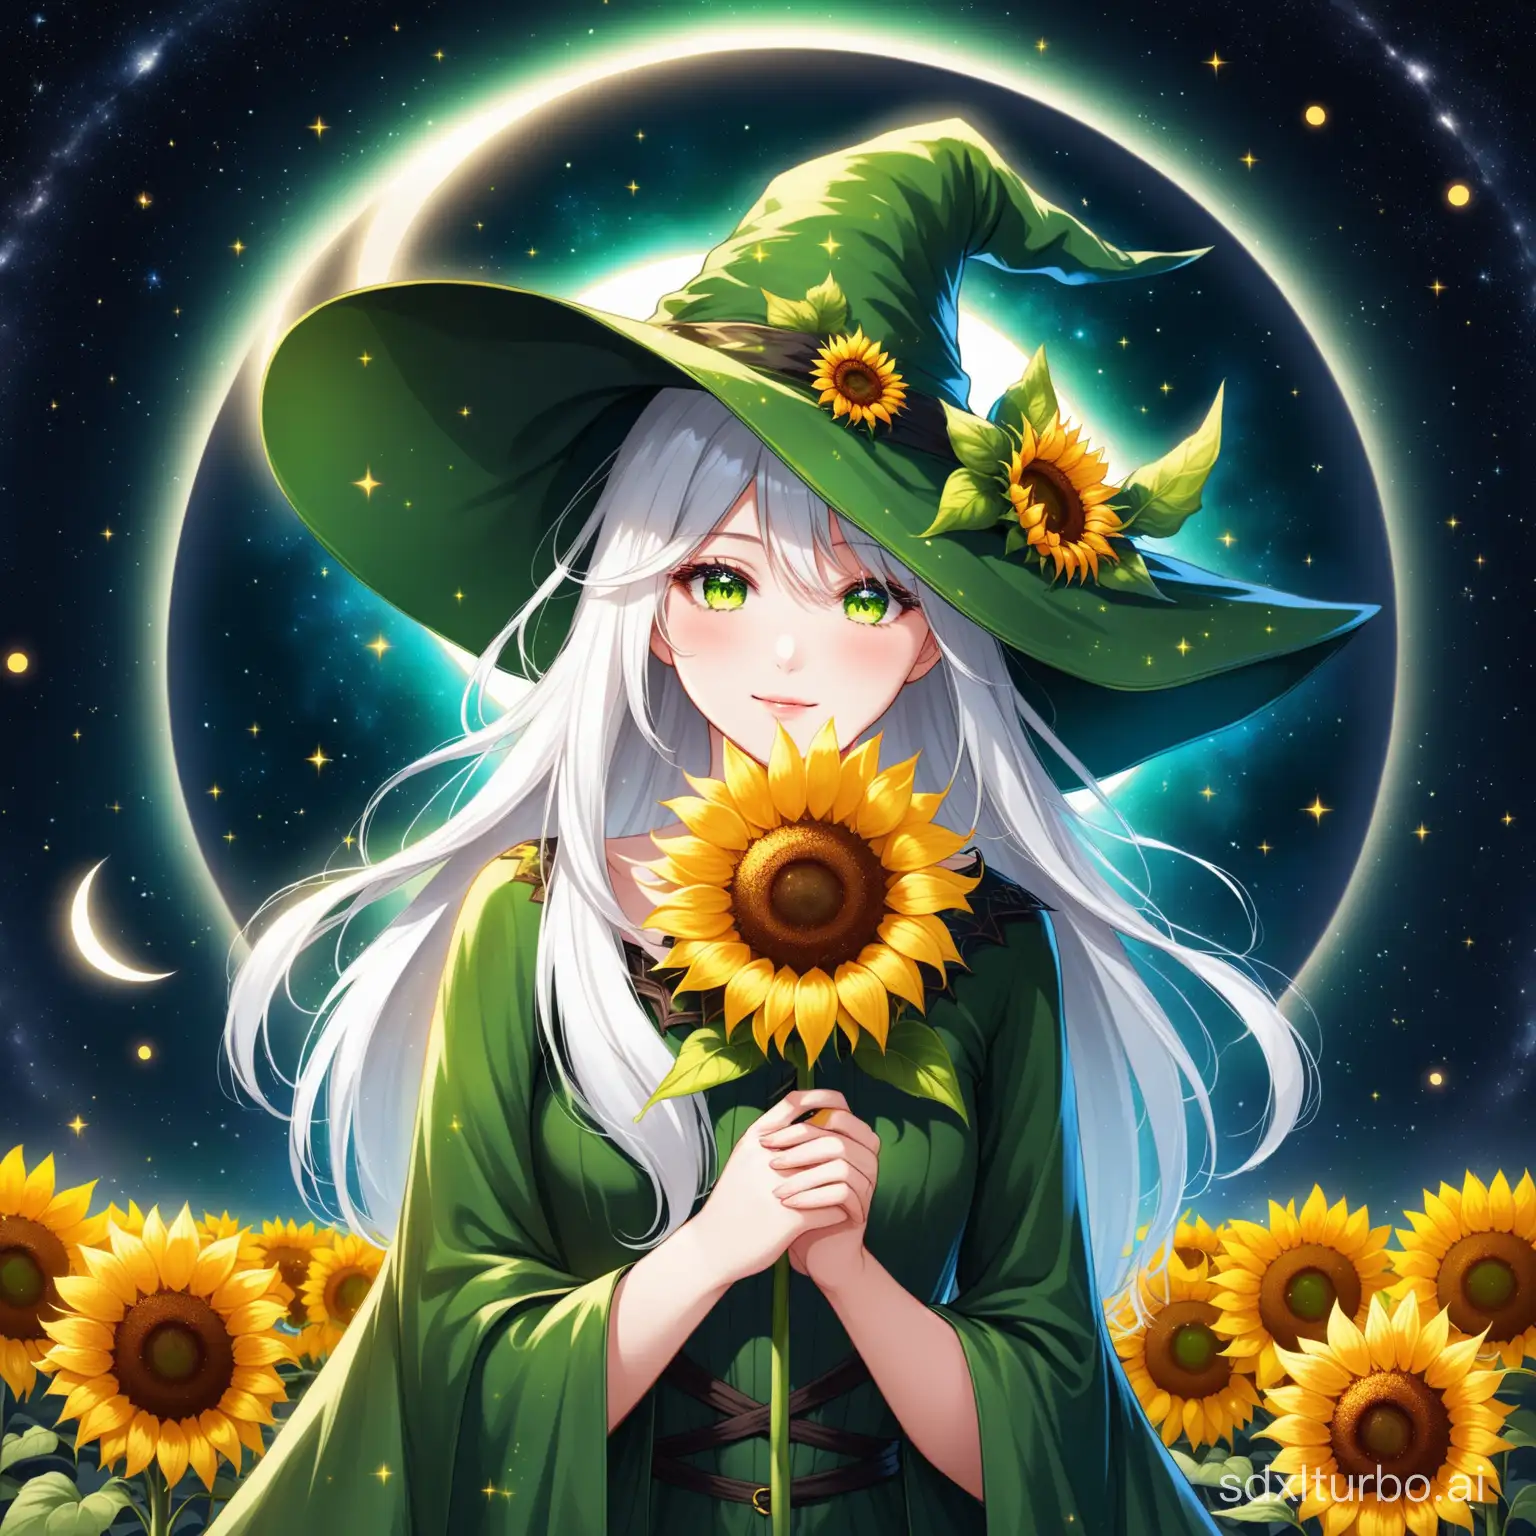 Enchanting-Girl-in-Green-Witch-Hat-Against-Eclipse-Sky